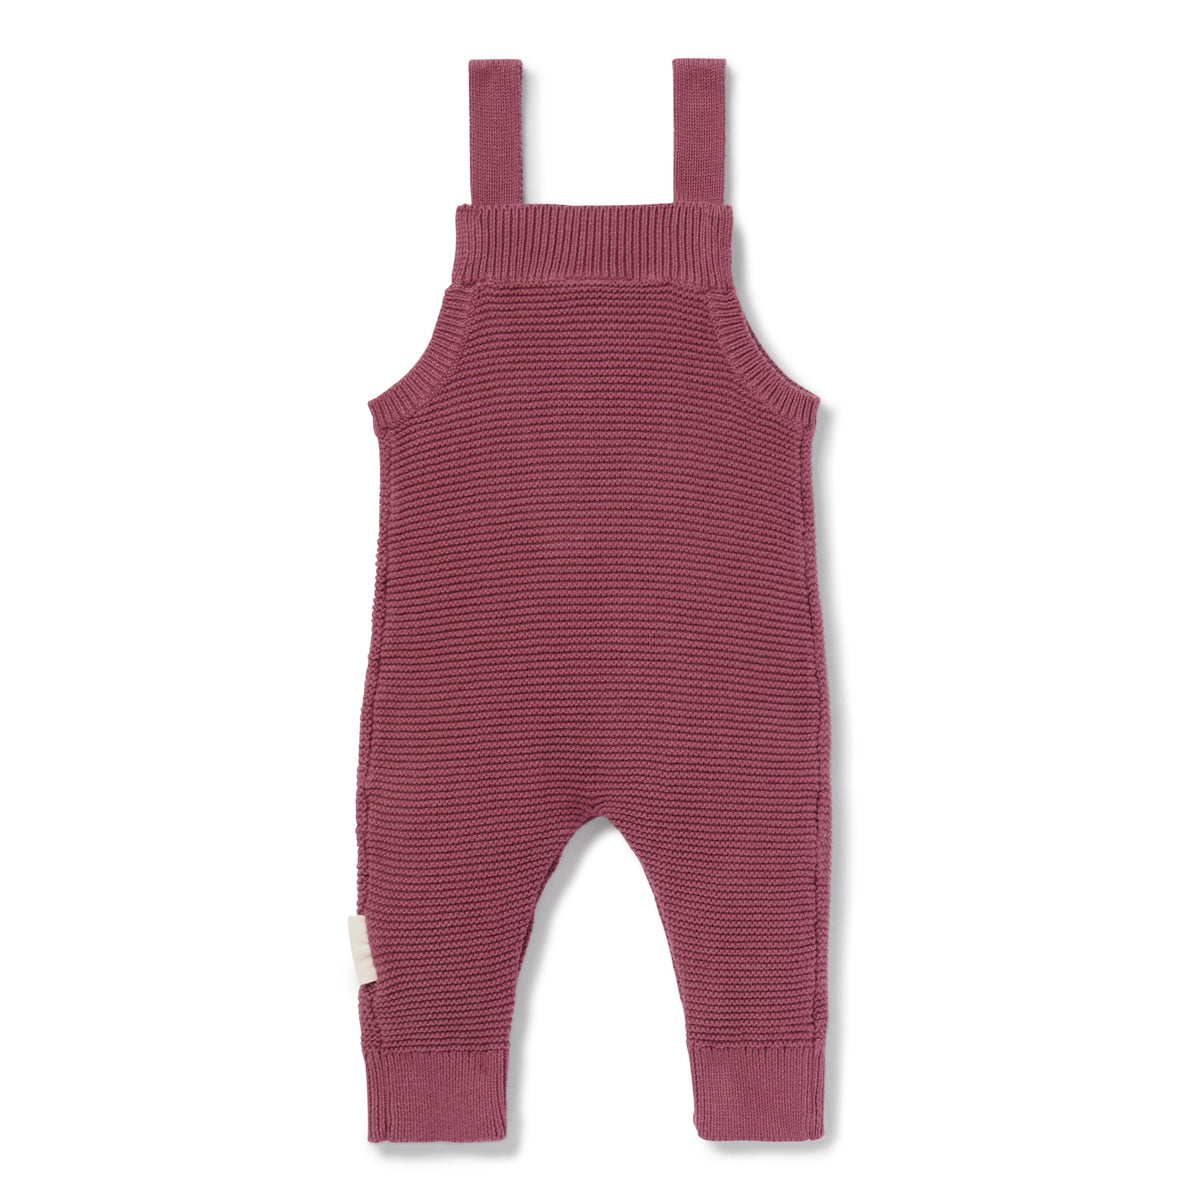 Berry Knit Pocket Overalls